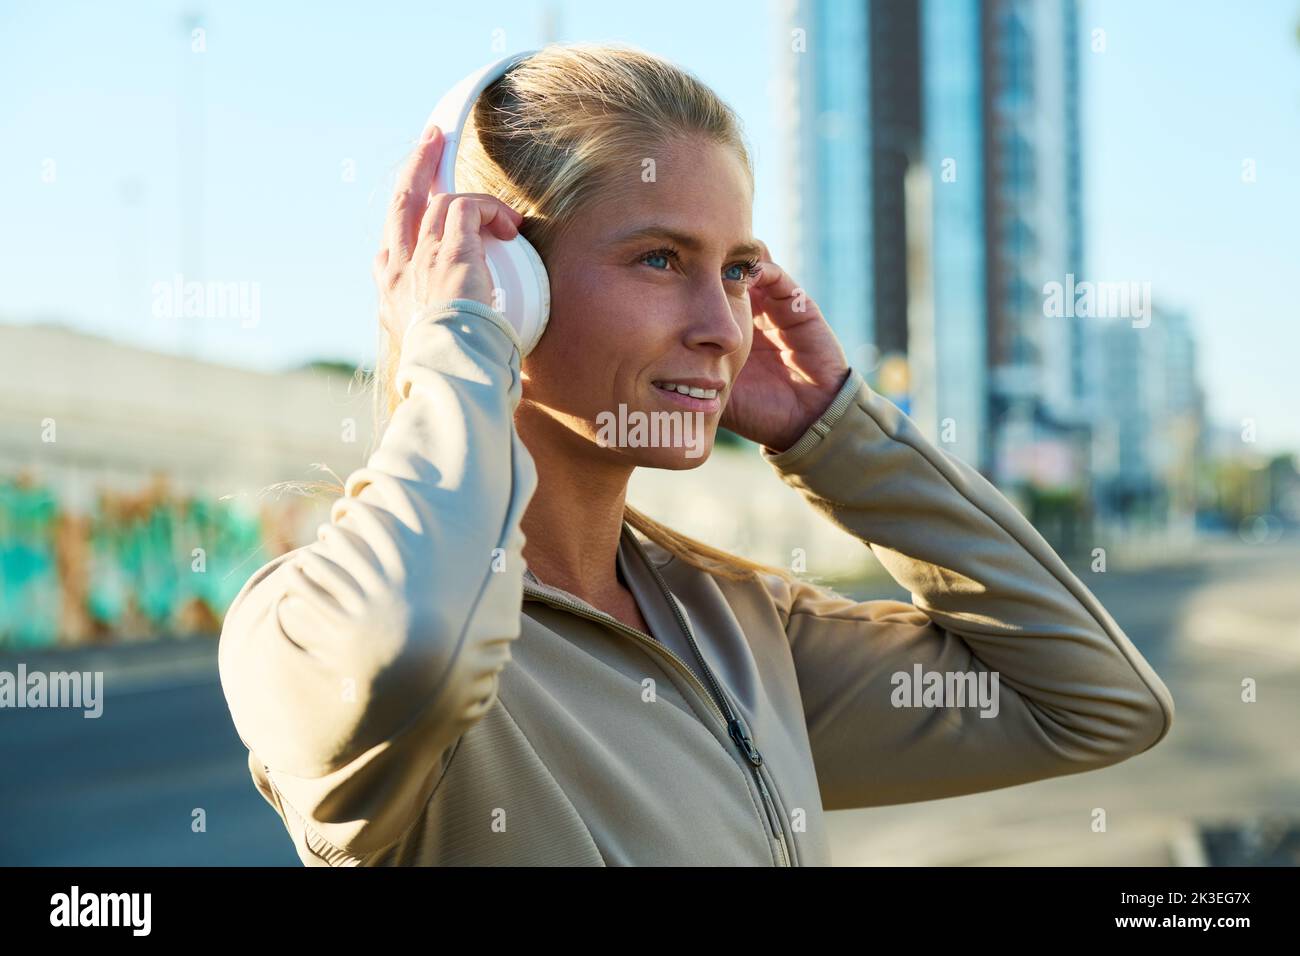 Side view of happy young blond sportswoman touching headphones on her head while listening to music in urban environment Stock Photo